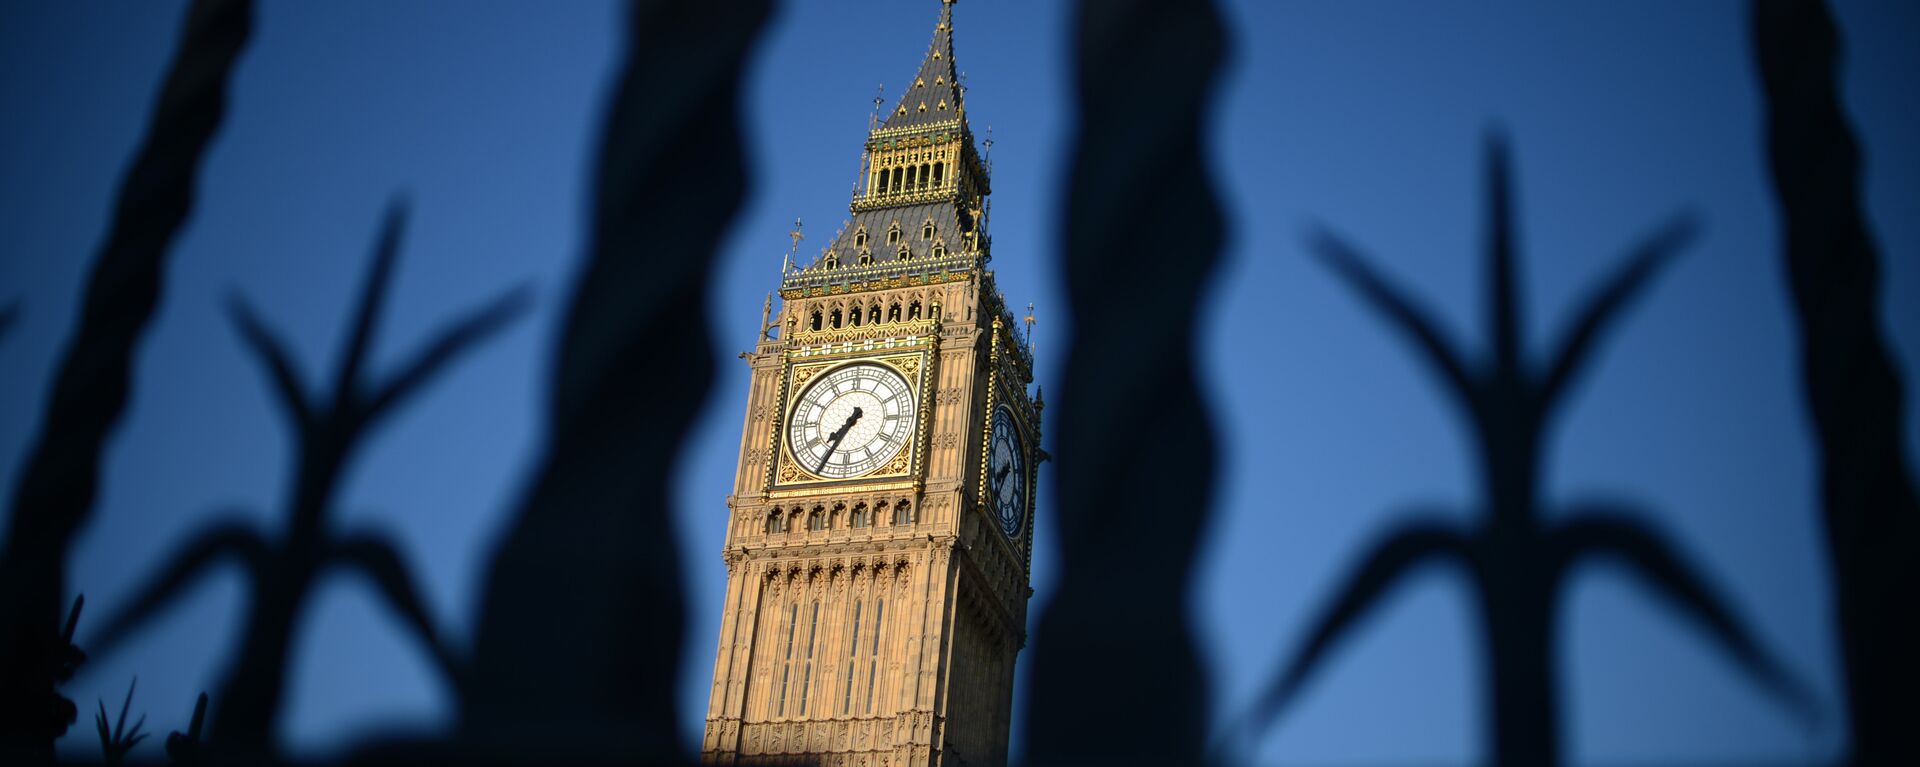 The Big Ben clock Tower is pictured in central London on July 22, 2012, five days before the start of the London 2012 Olympic Games. - Sputnik Mundo, 1920, 03.05.2022